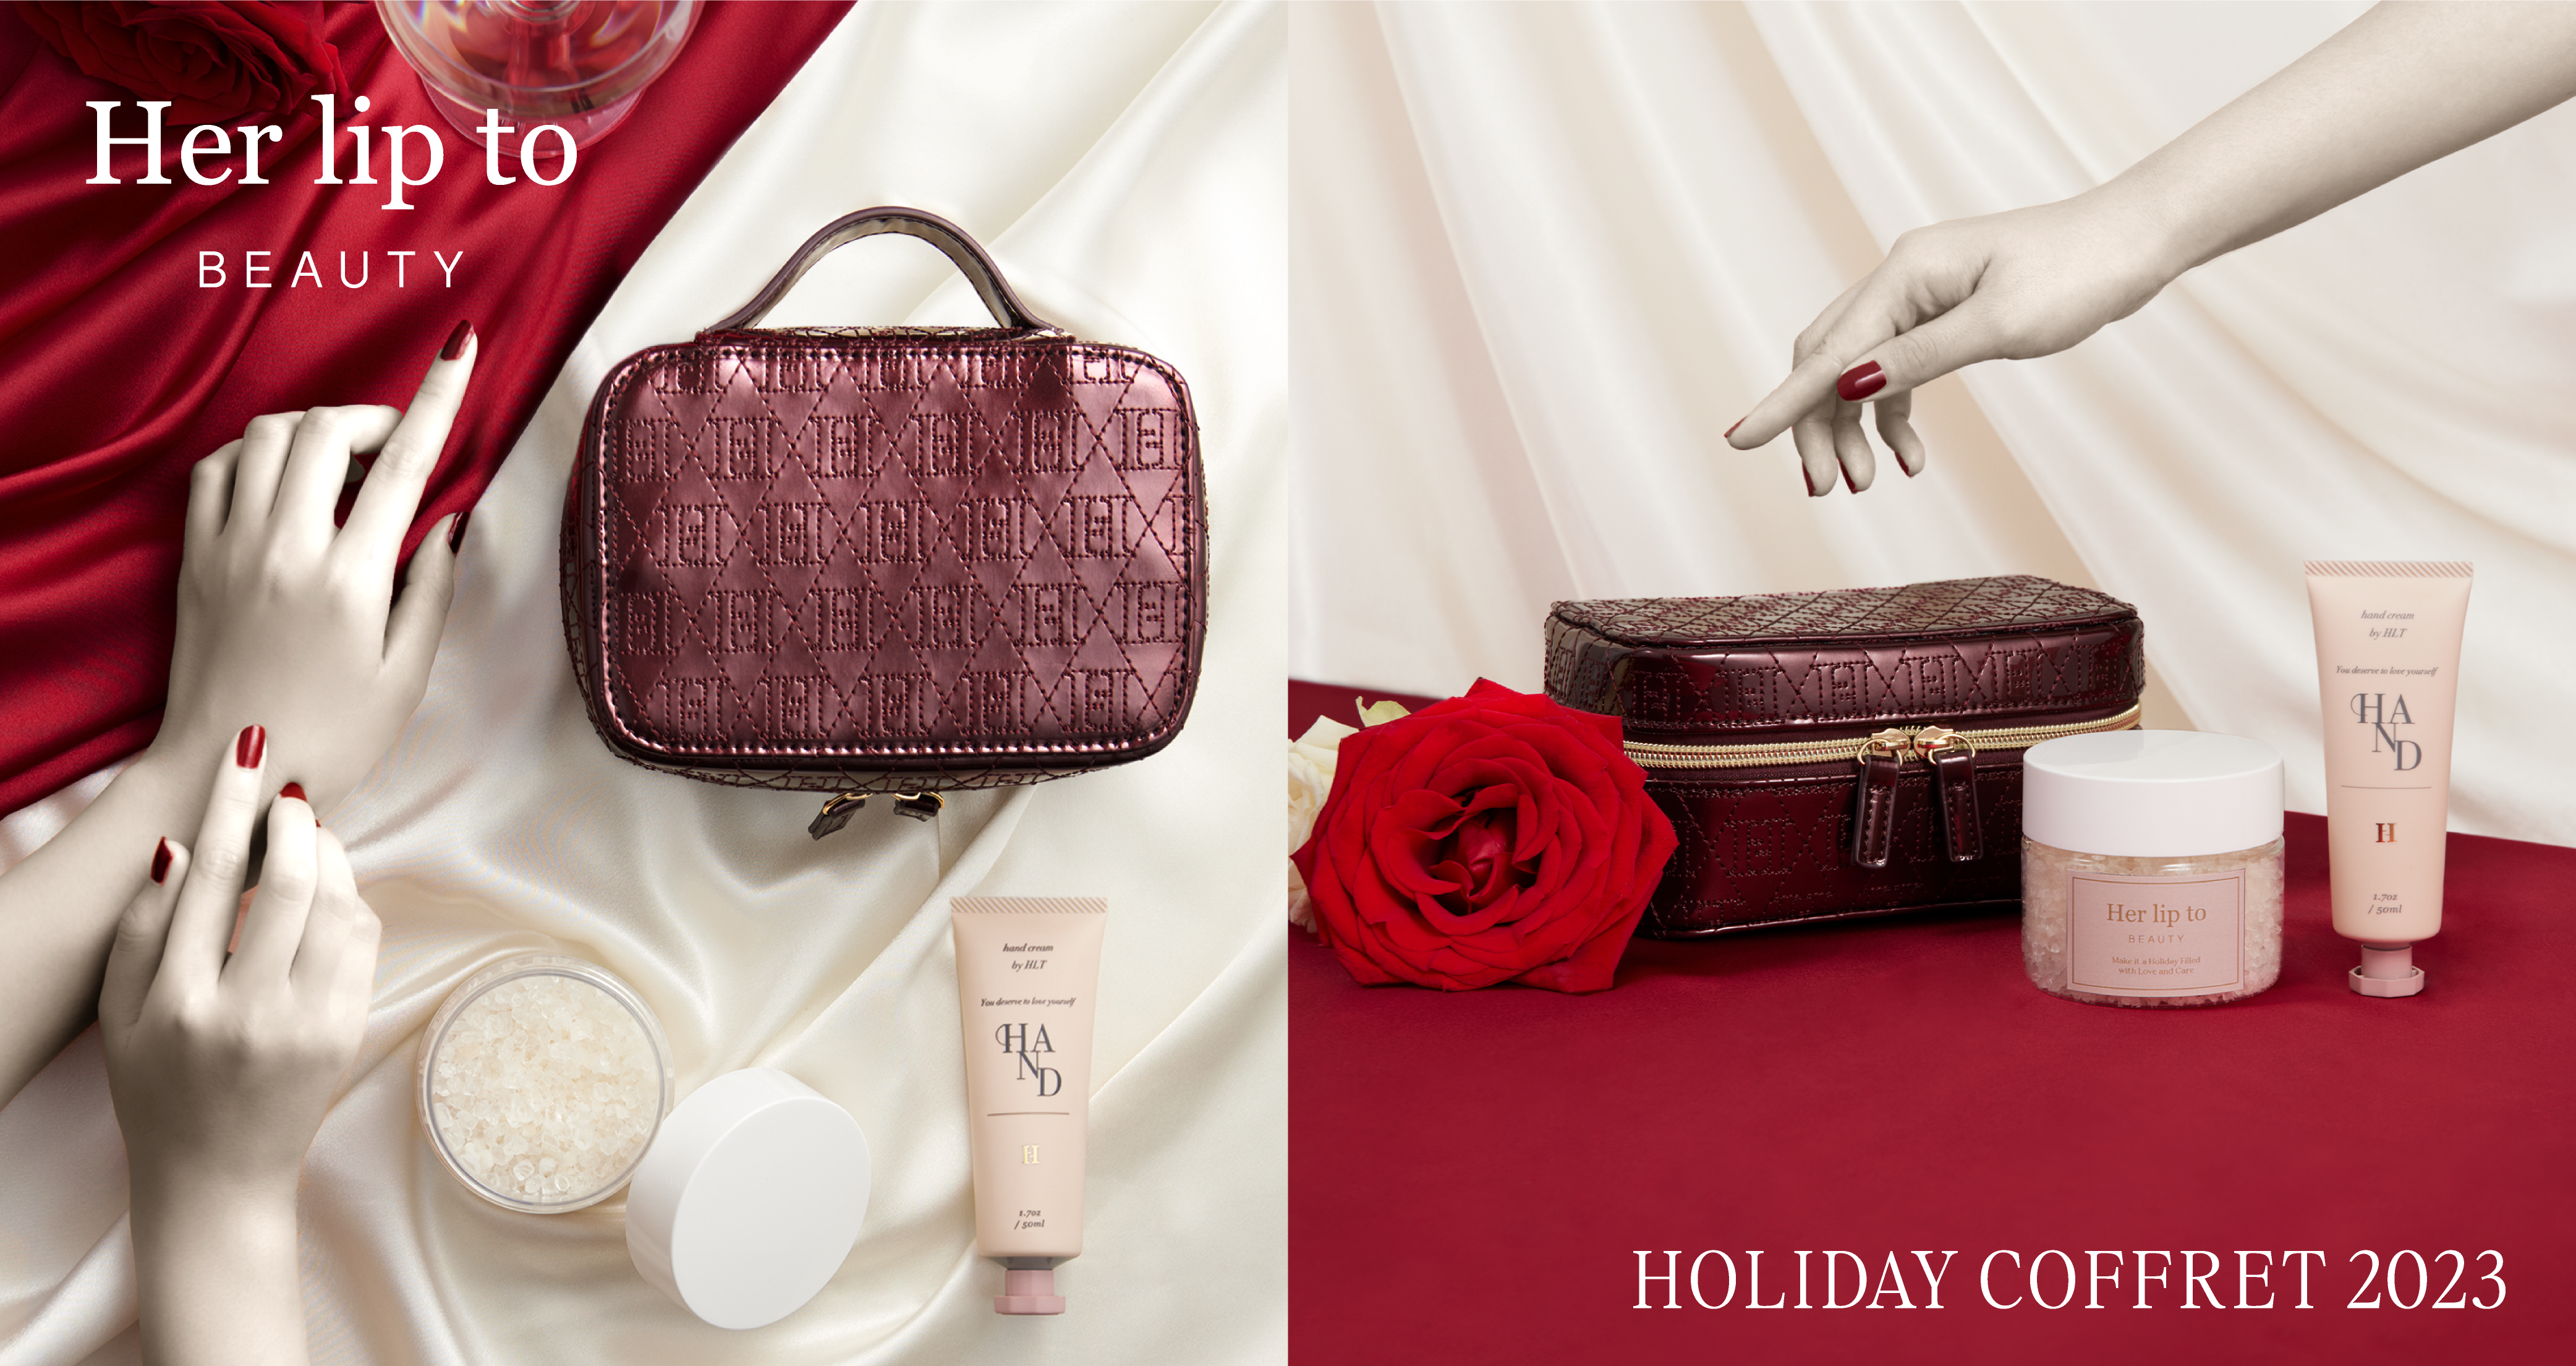 Info】Her lip to BEAUTY HOLIDAY COFFRET 2023 第二弾